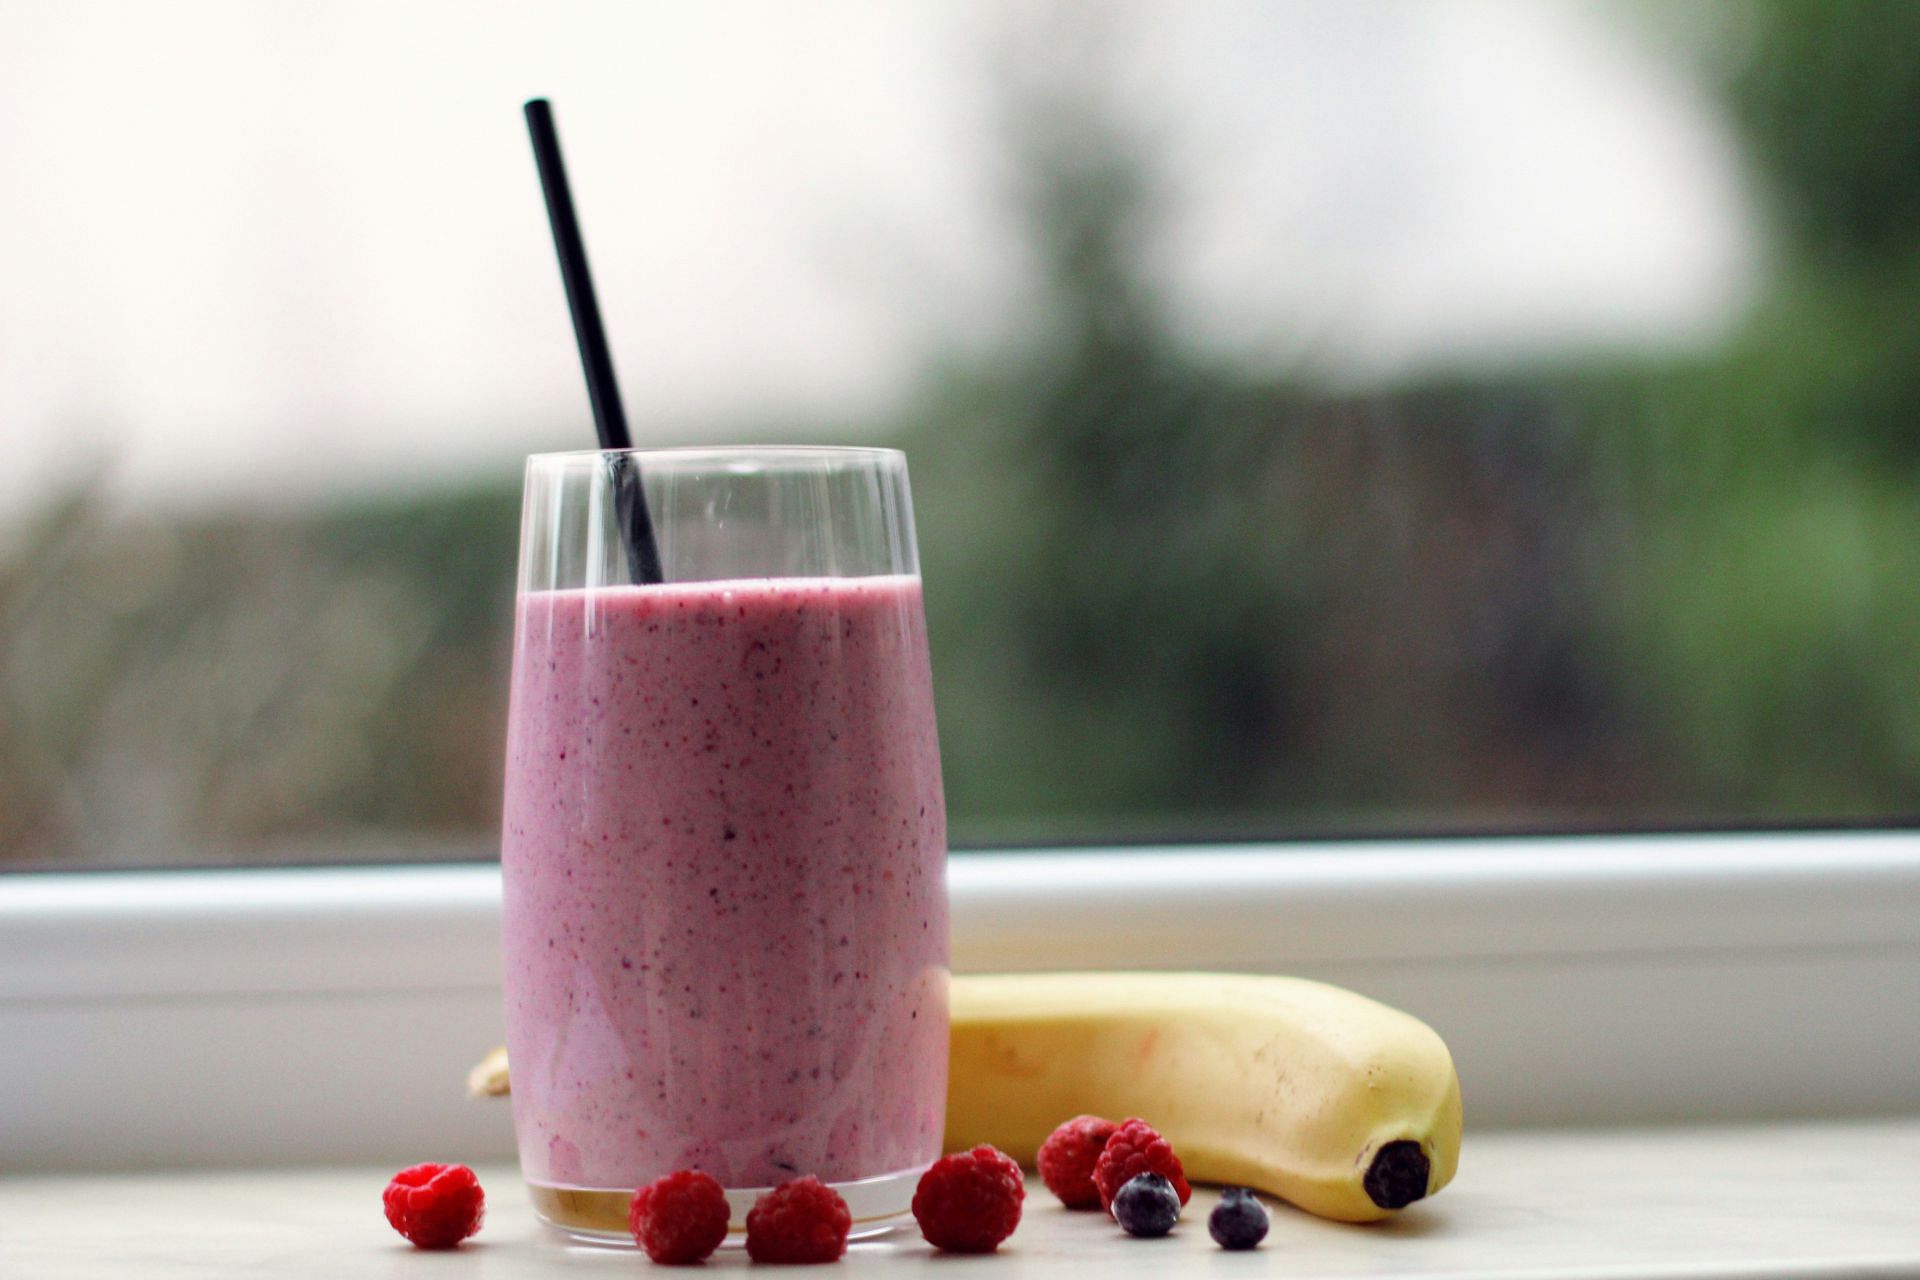 A smoothie can be a good drink to start the day (Image by Denis Tuksar/Unsplash)